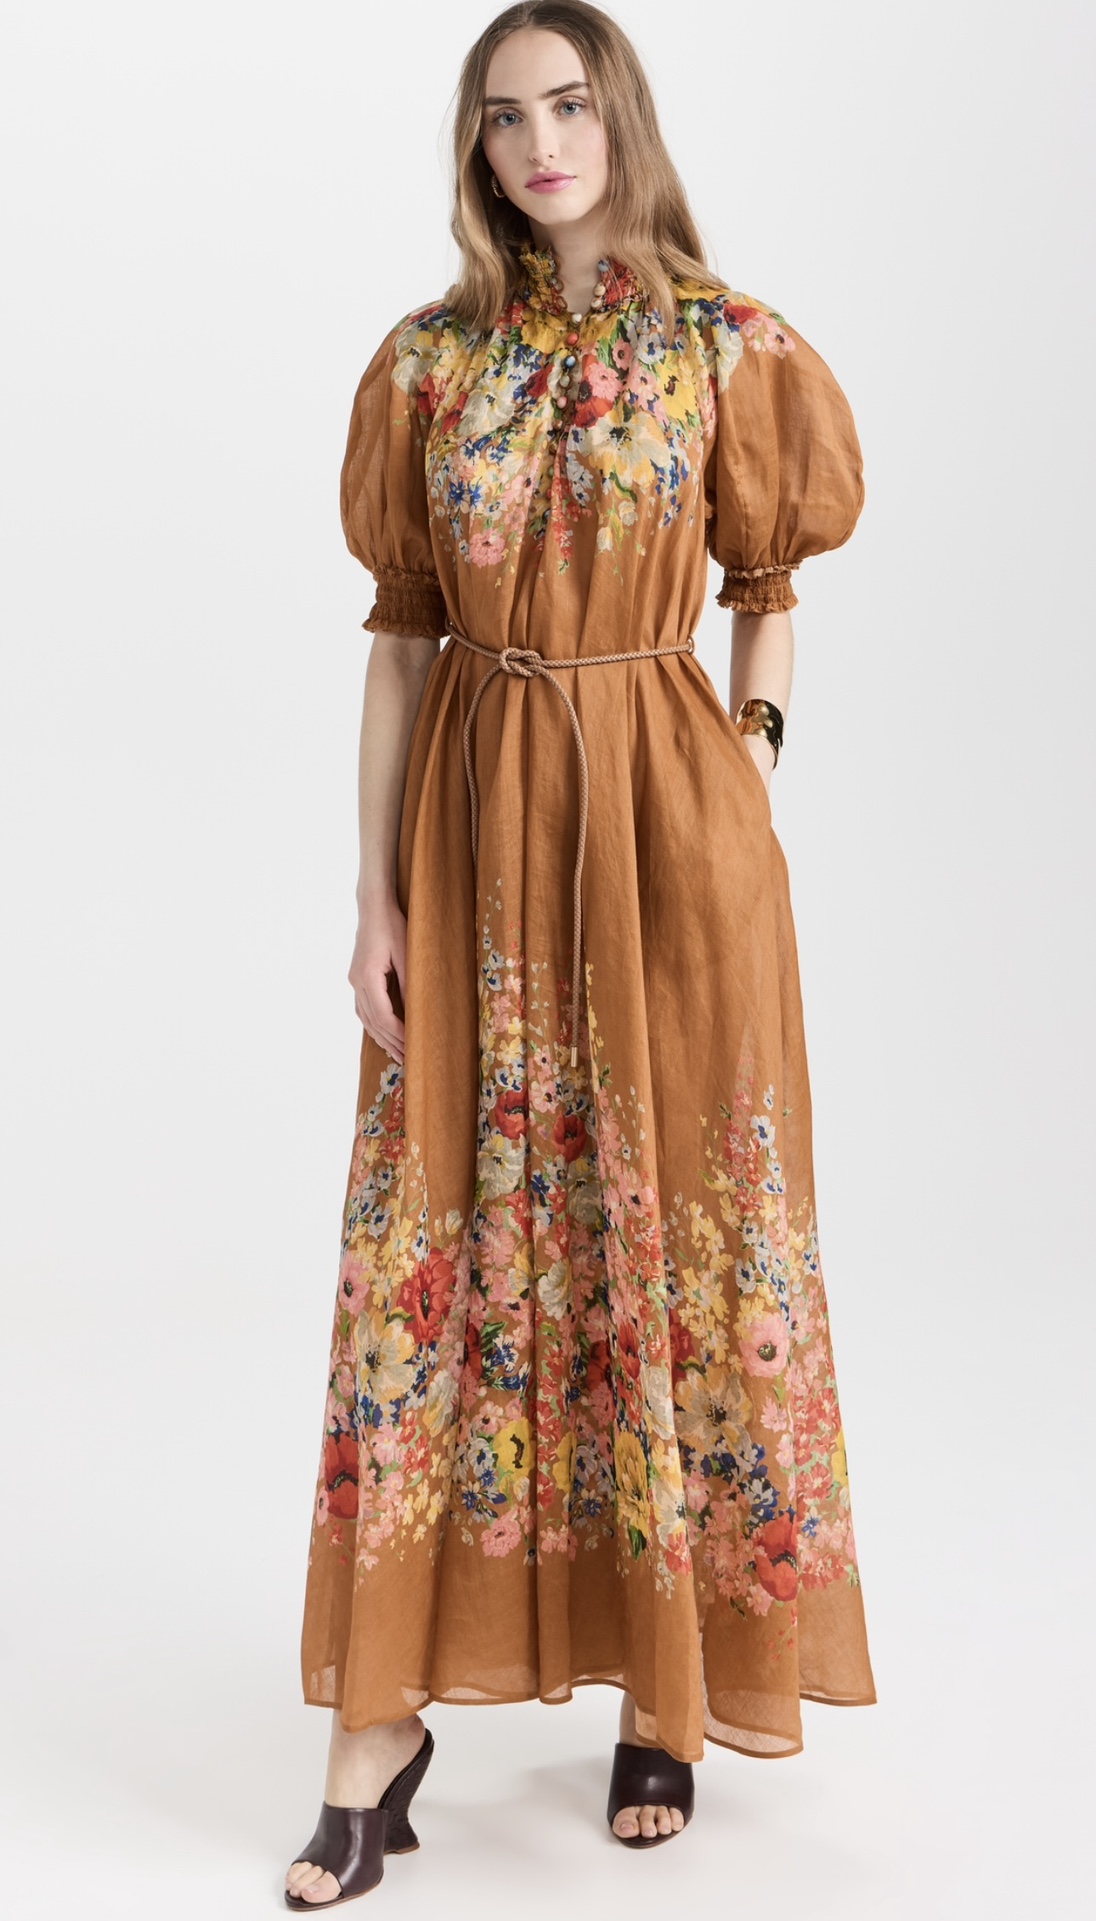 Zimmermann Clothing Dresses Cheap High Quality Replica
 Printing Spring/Summer Collection